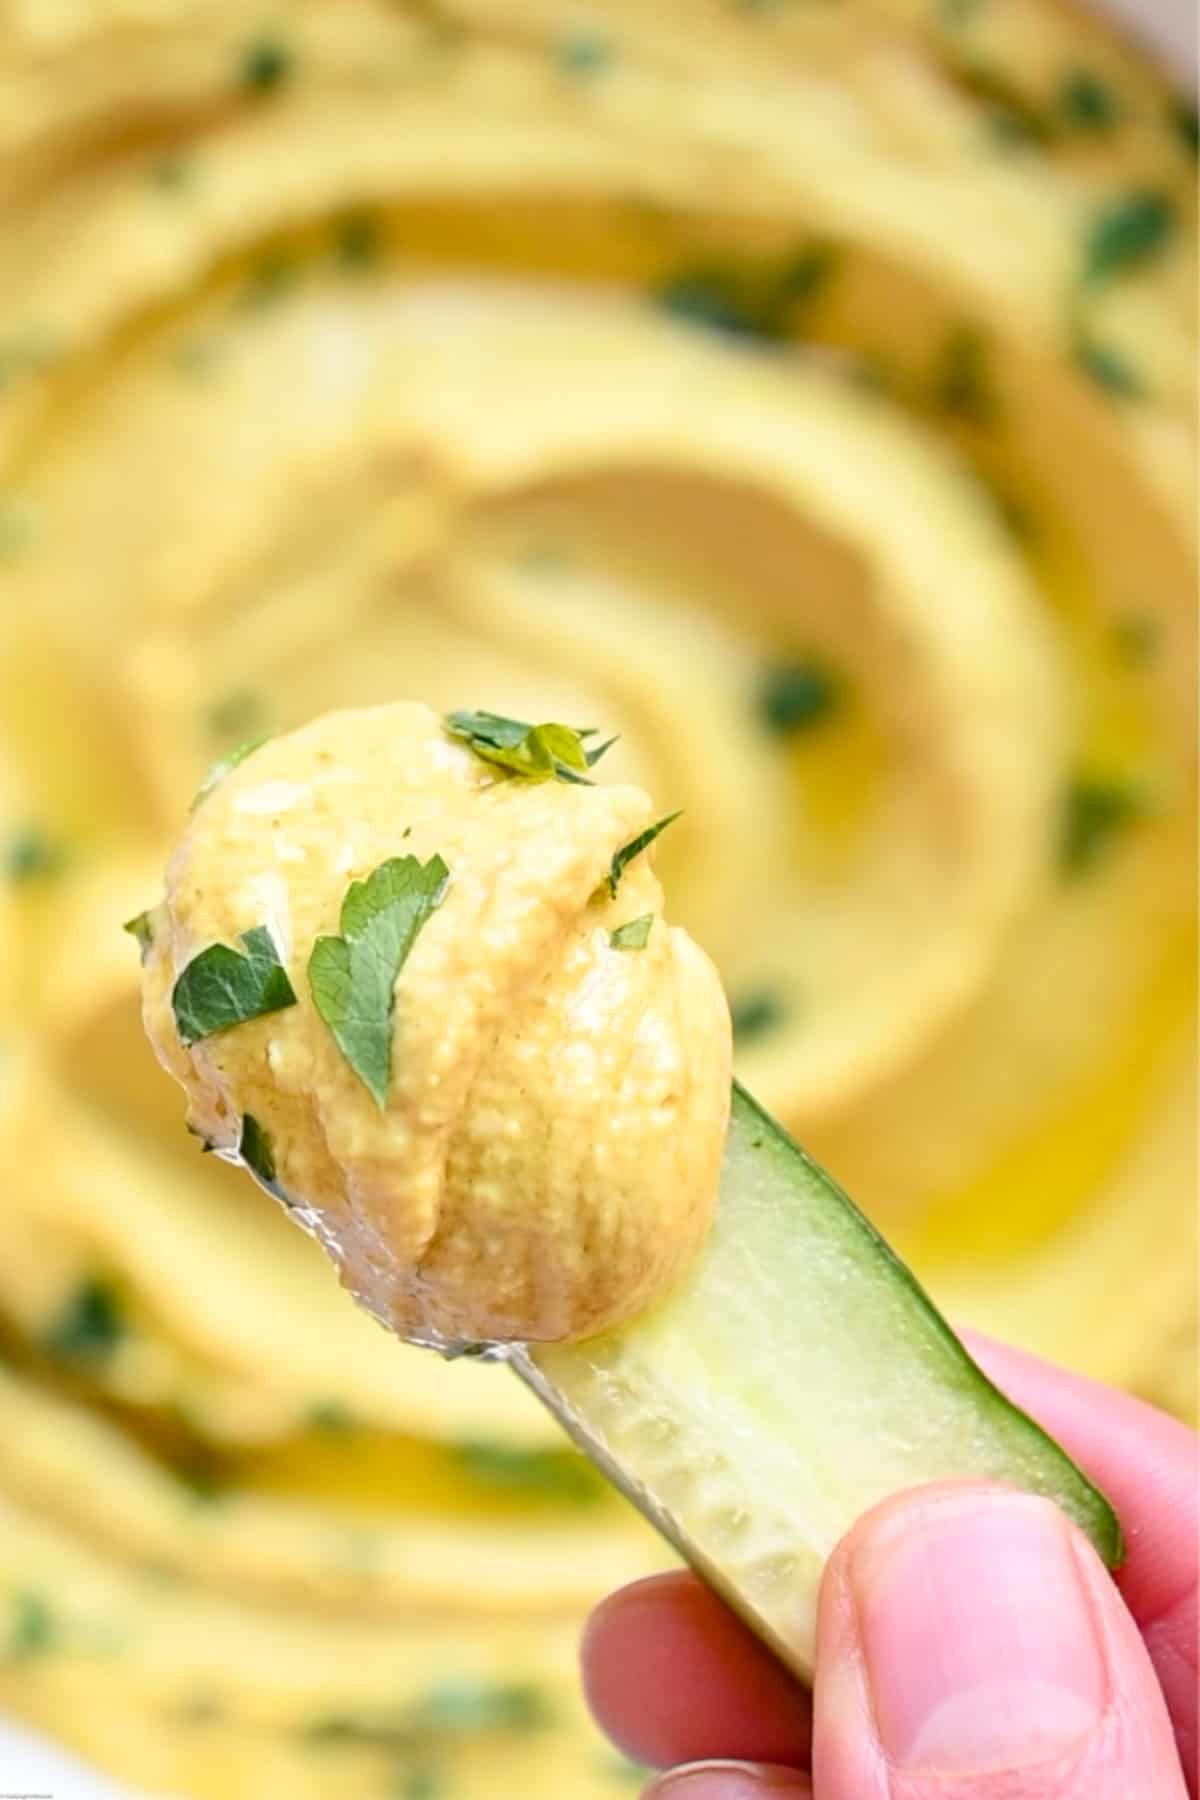 Bright yellow high-protein red lentil dip on a piece of cucumber held between fingers.